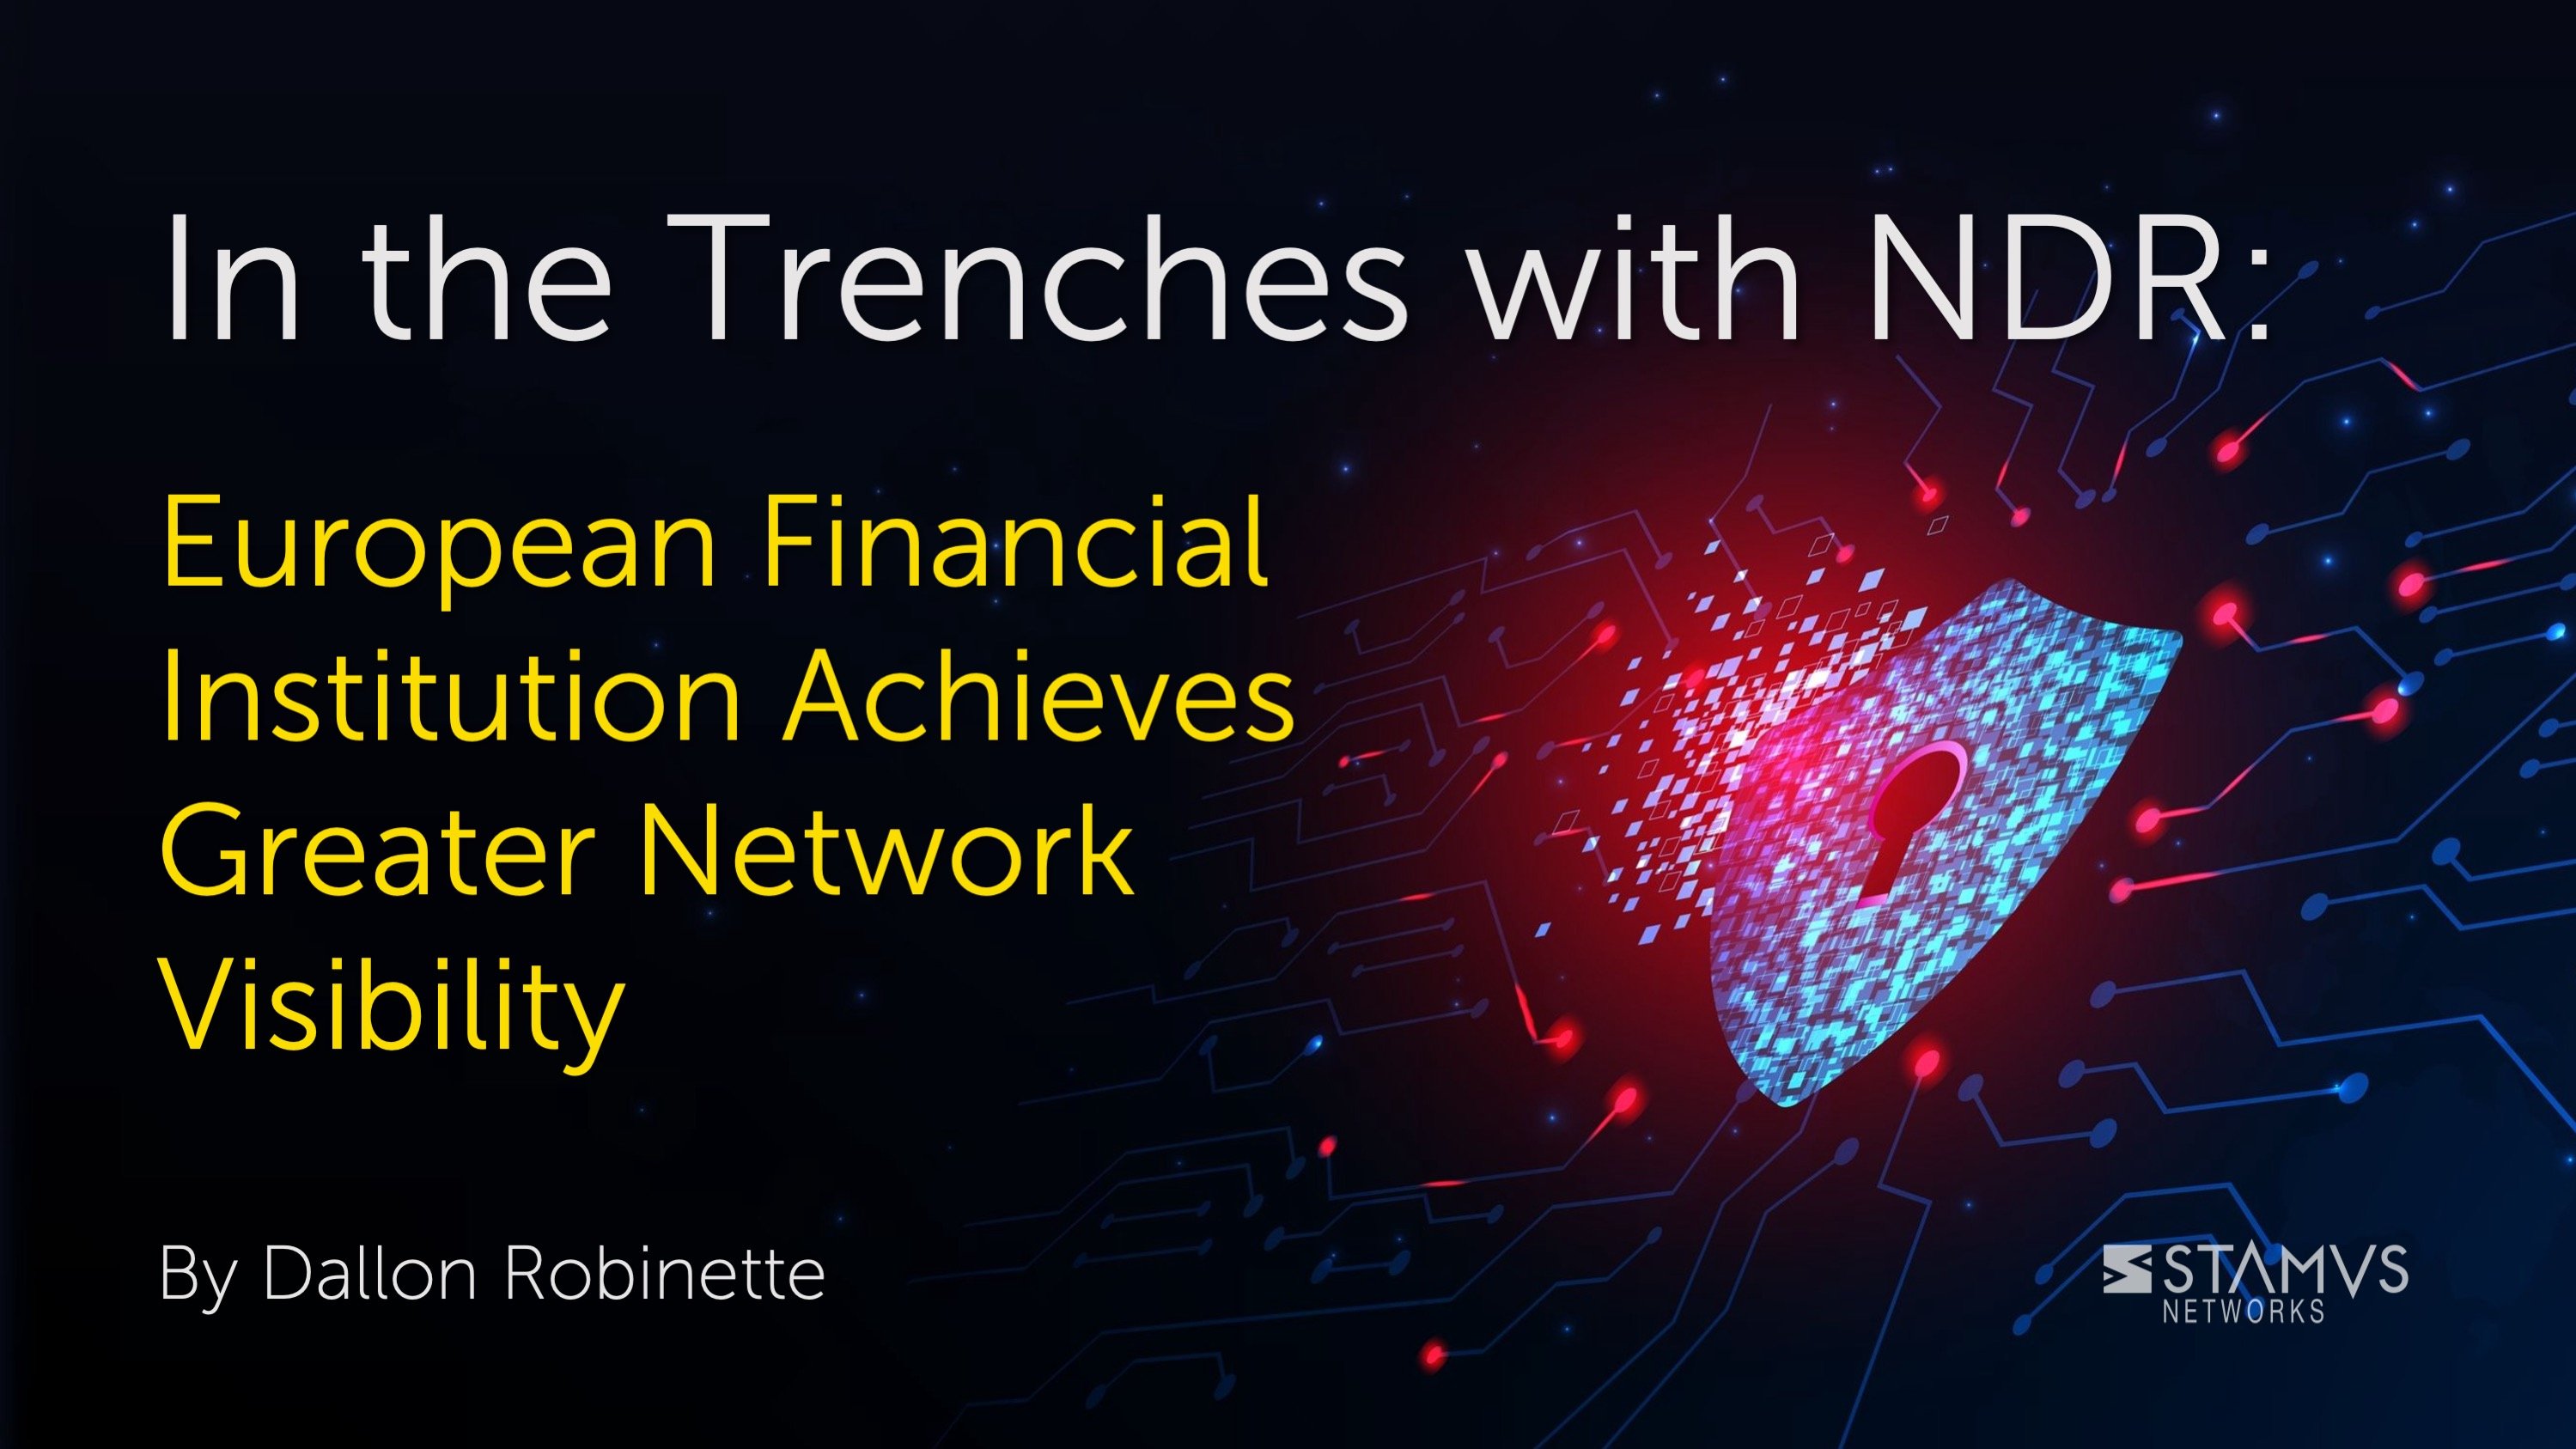 In the Trenches with NDR: European Financial Institution Achieves Greater Network Visibility